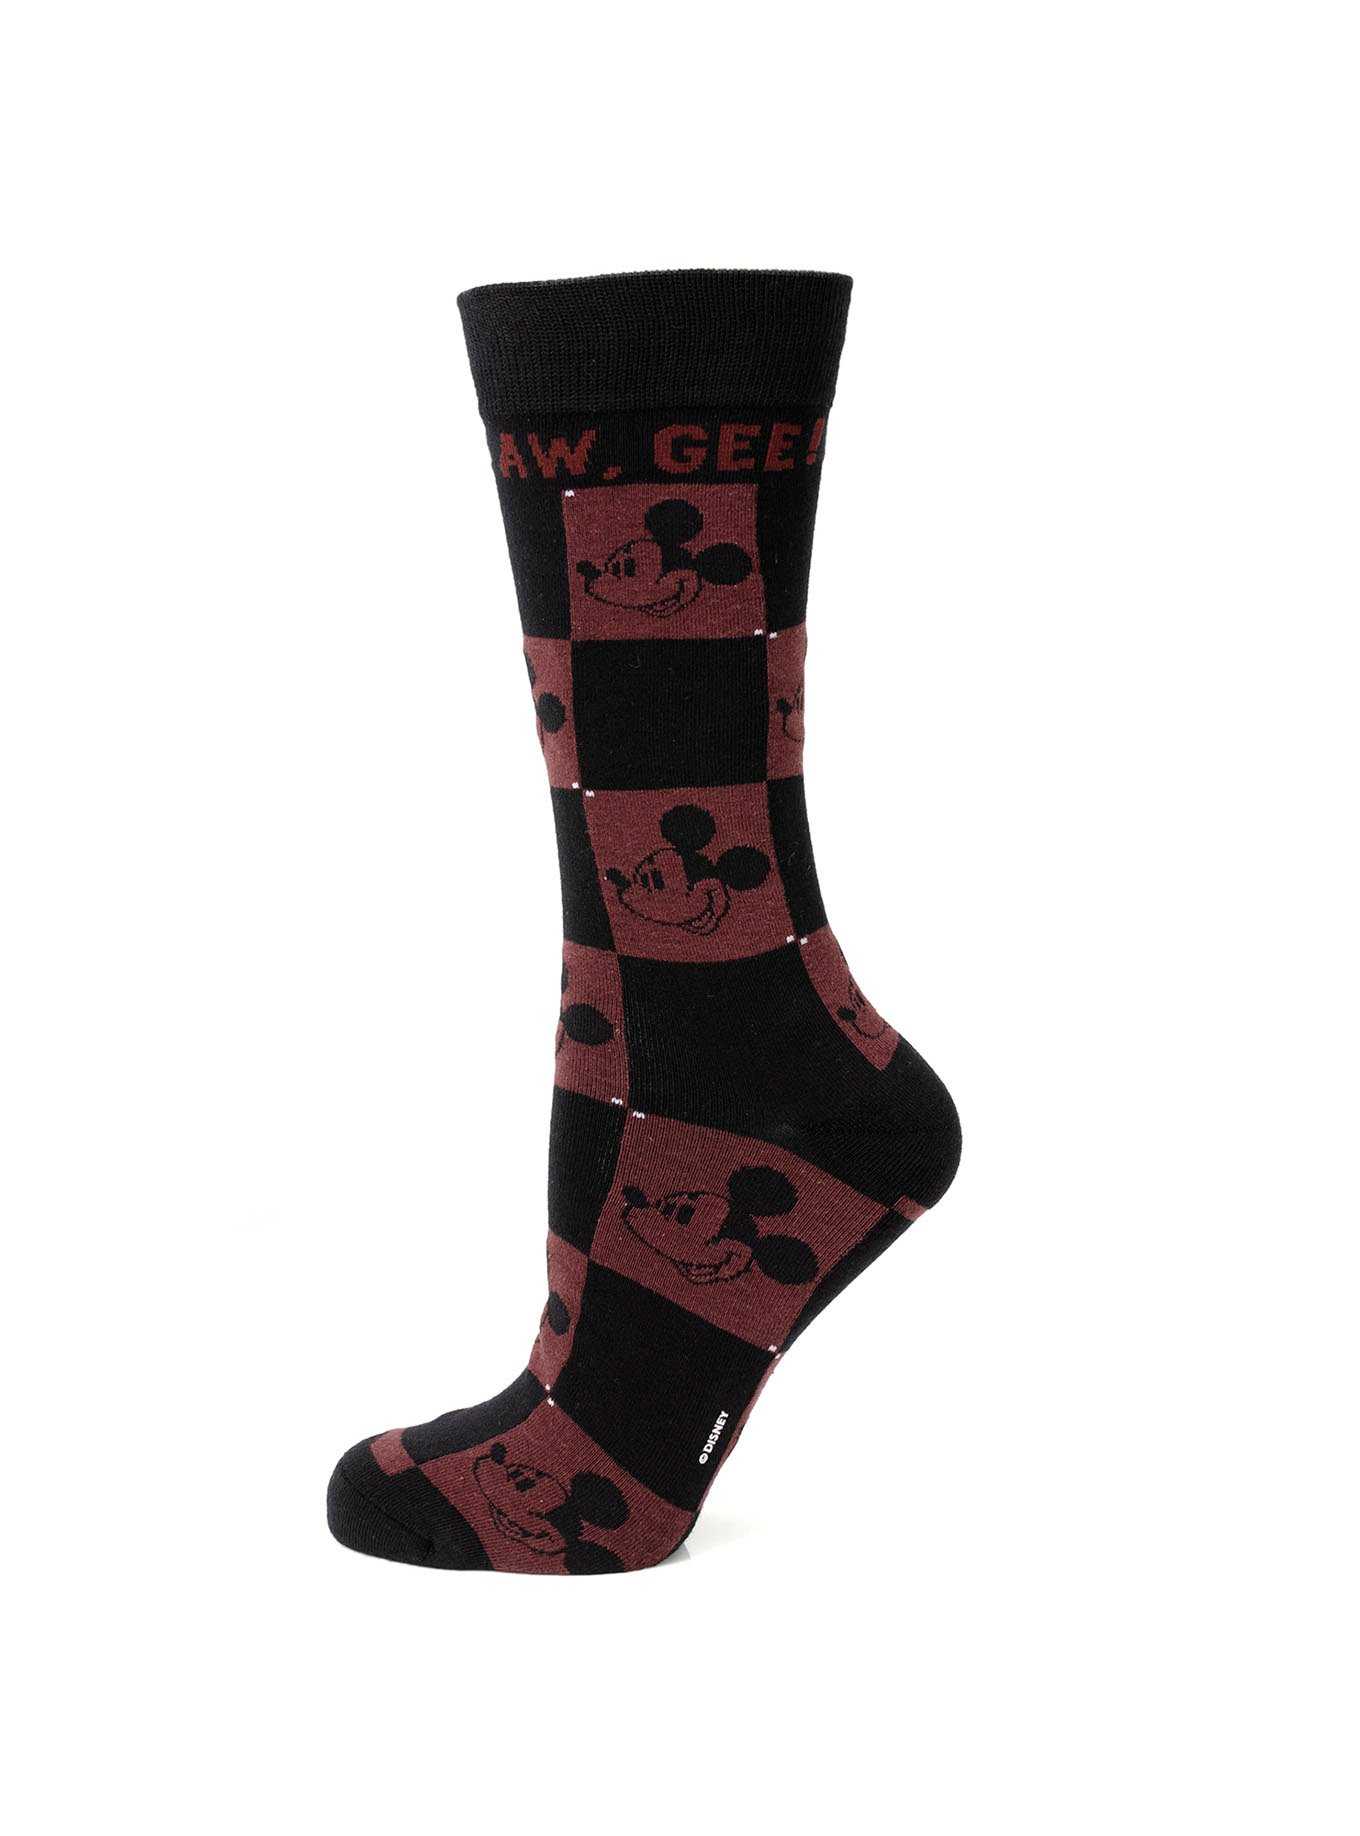 Disney Mickey Mouse Aw Gee Black & Red Socks, , hi-res